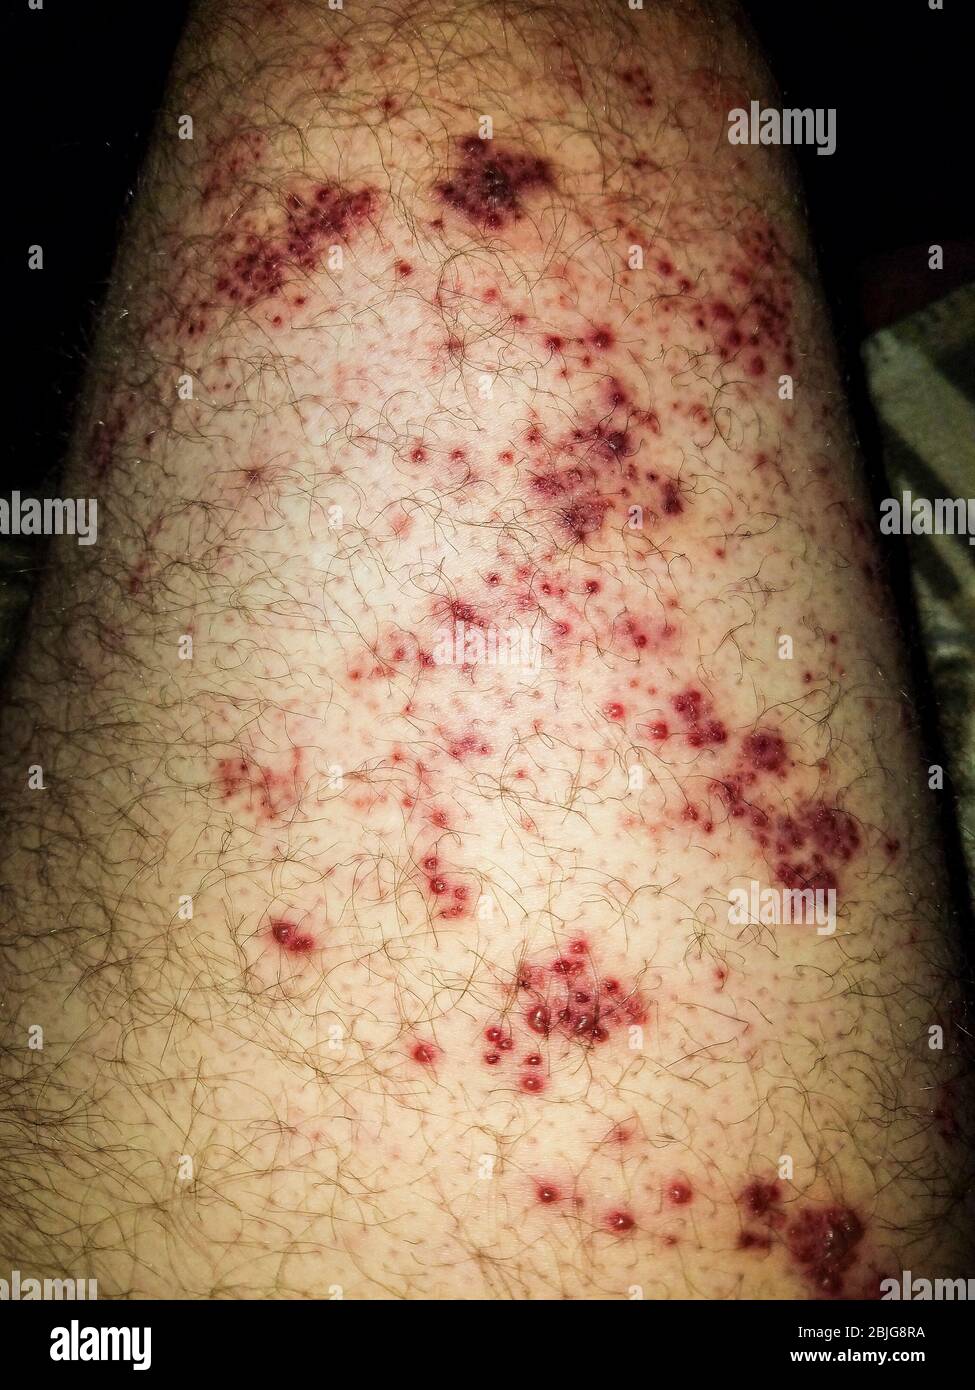 Shingles Herpes Zoster Stock Photo